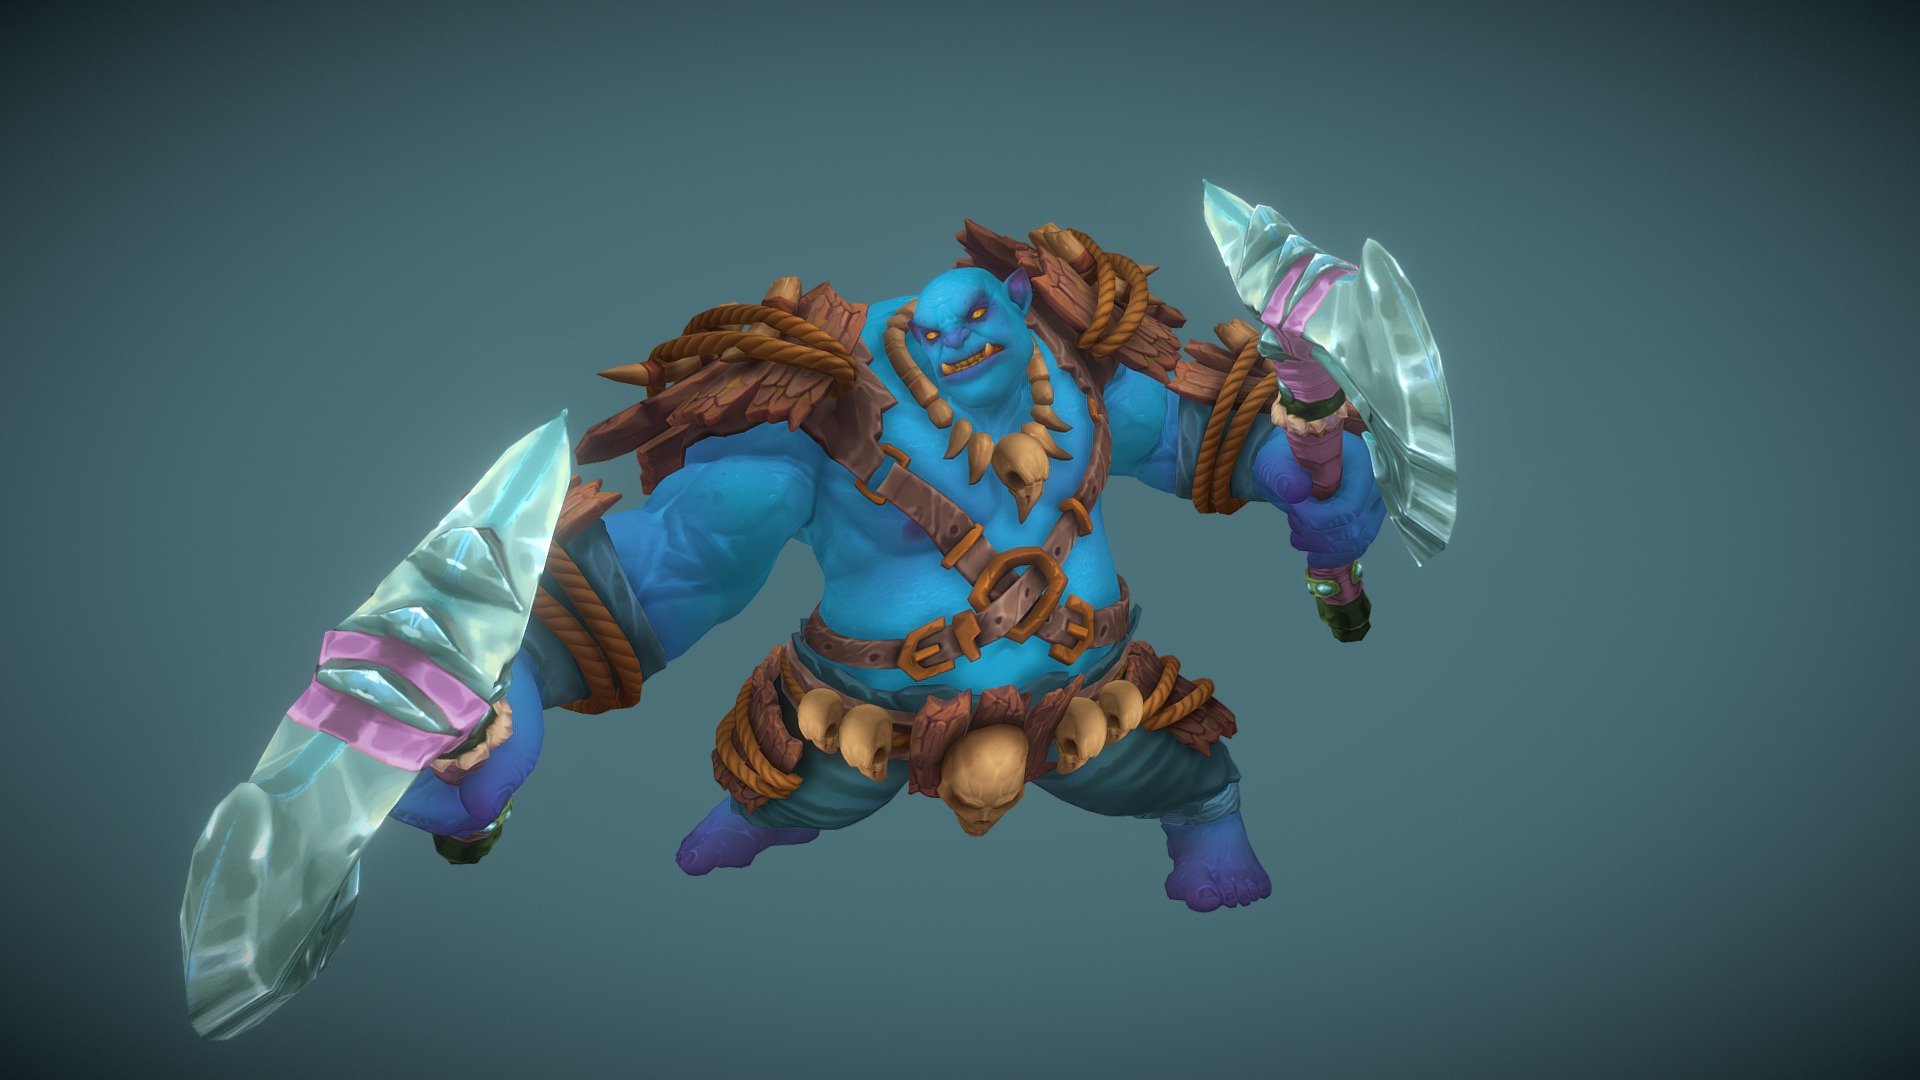 Stylized character for a project.

Software used: Zbrush, Autodesk Maya, Autodesk 3ds Max, Substance Painter - Stylized Fantasy Ogre Warrior - 3D model by N-hance Studio (@Malice6731) 3d model